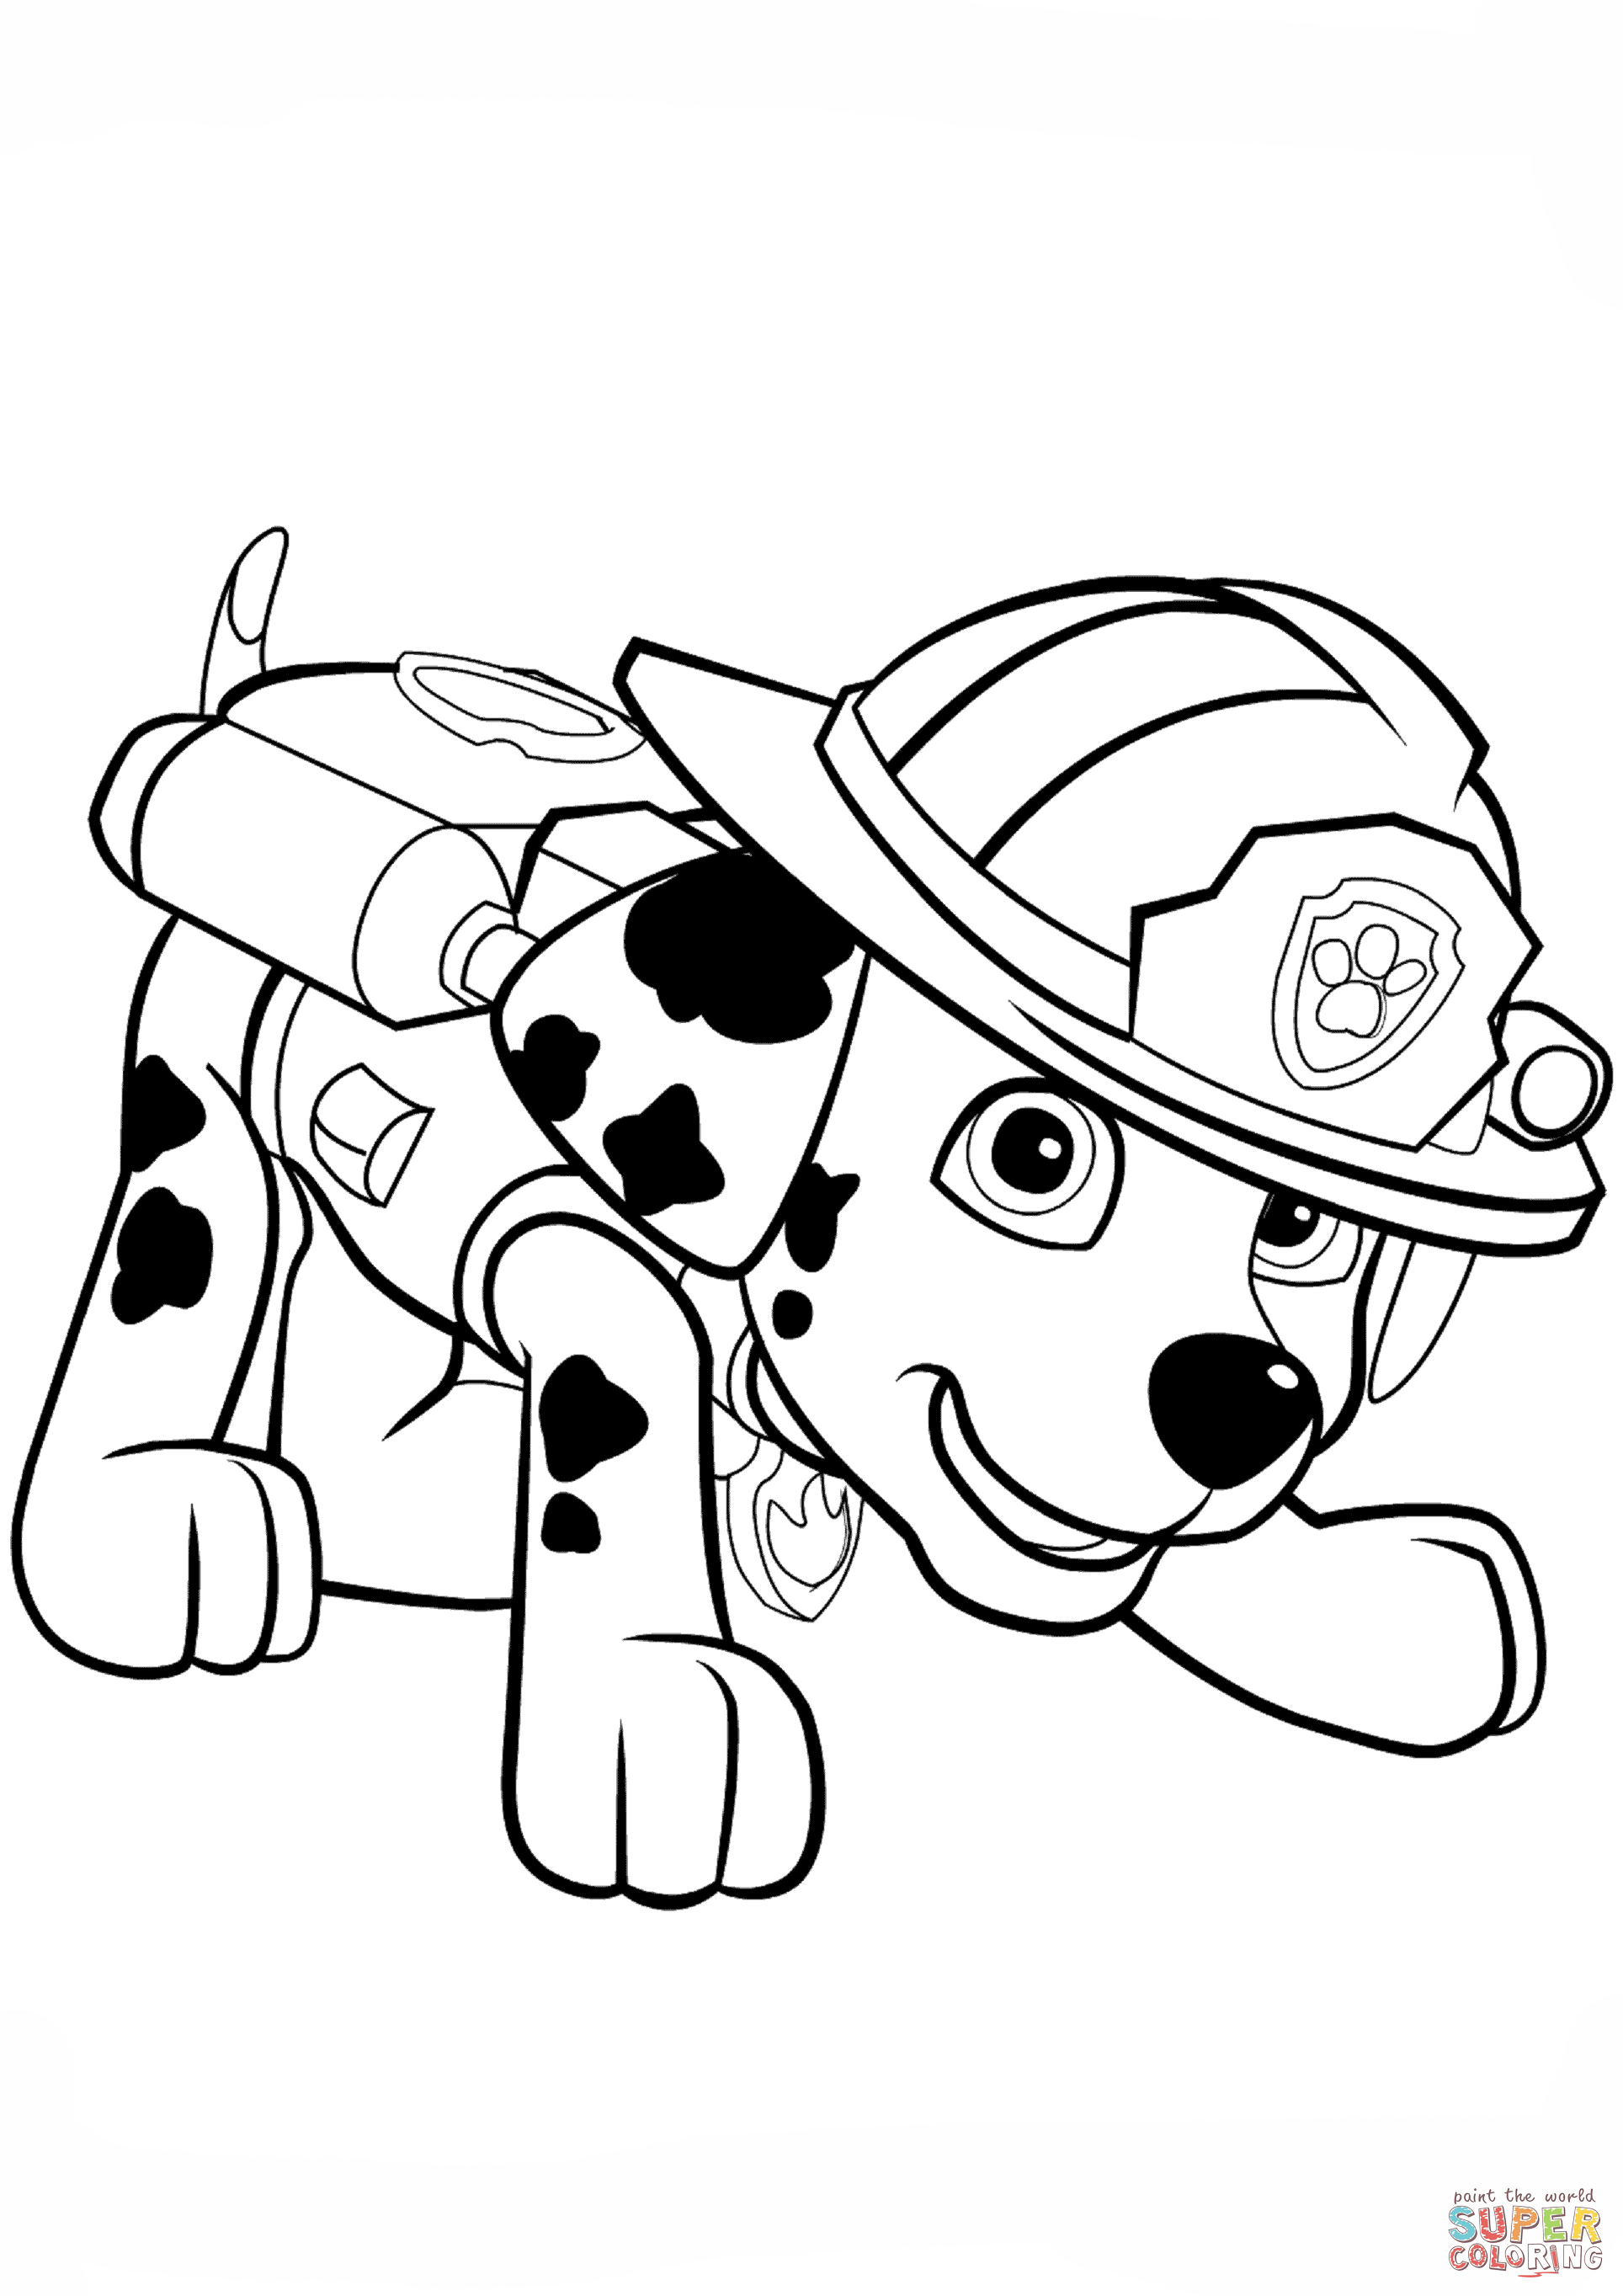 Little Puppy Coloring Pages Paw Patrol Marshall Puppy Coloring Page Free Printable Coloring Pages